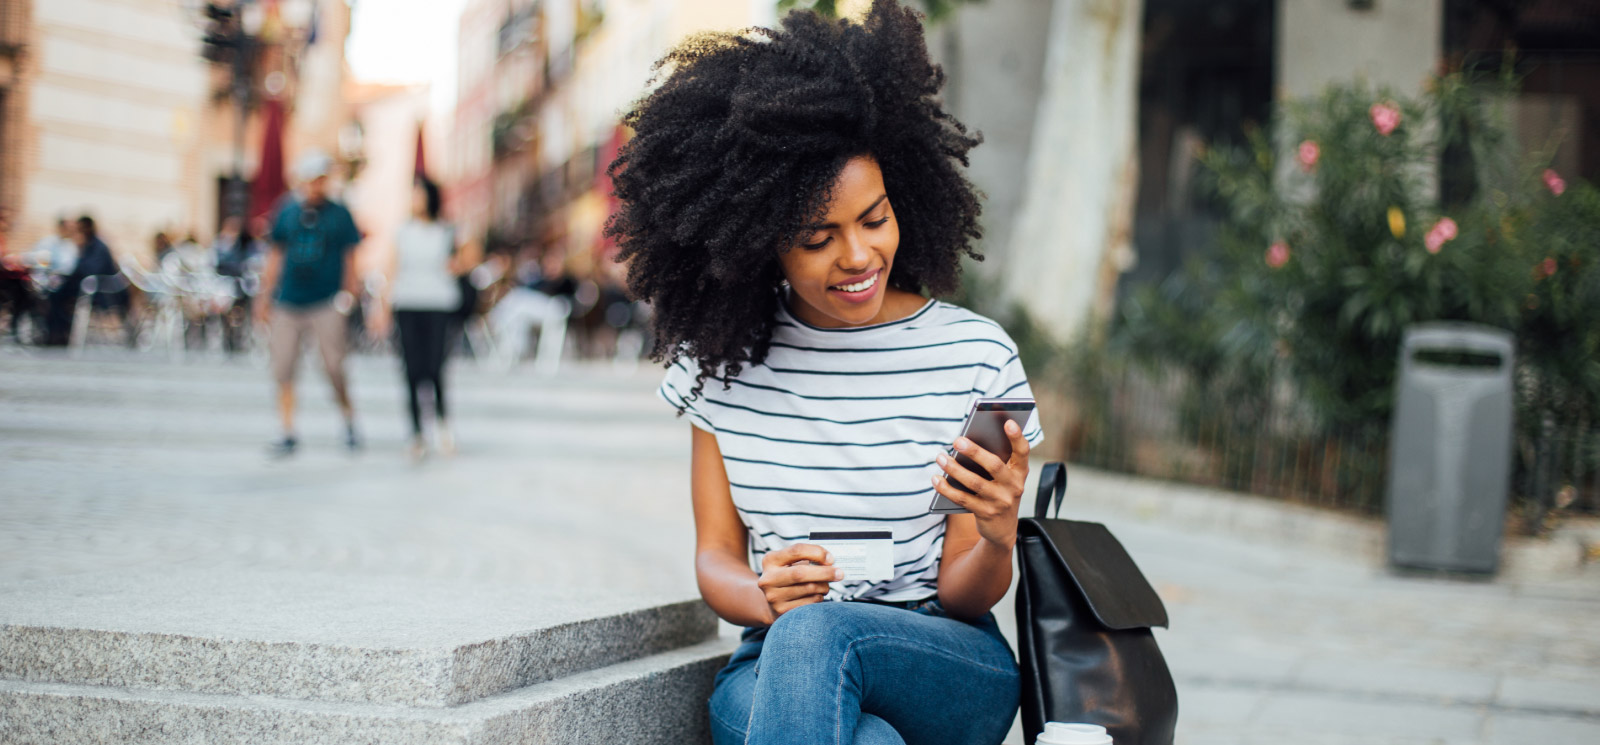 Woman sitting outside holding phone and card in hand.